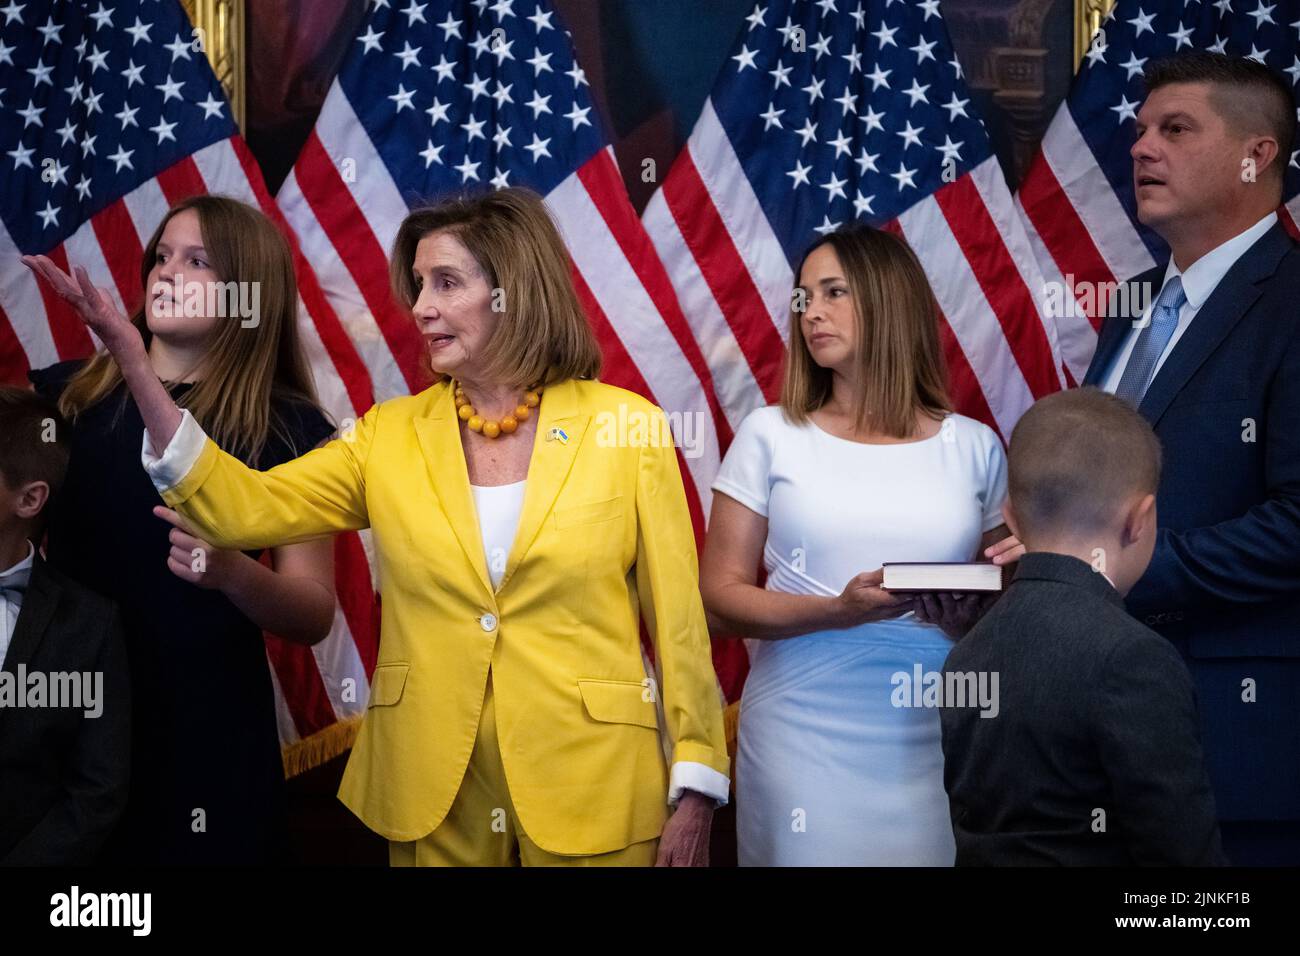 Washington, USA. 12th Aug, 2022. House Speaker Nancy Pelosi (D-CA) gestures prior to a ceremonial swearing-in for Congressman-elect Brad Finstad (R-MN), far-right, at the U.S. Capitol, in Washington, DC, on Friday, August 12, 2022. Today the House of Representatives returned from August recess to vote on the Inflation Reduction Act, a $739 billion tax-and-energy bill filled with Democrat priorities that the Senate passed last week with no Republican support. (Graeme Sloan/Sipa USA) Credit: Sipa USA/Alamy Live News Stock Photo